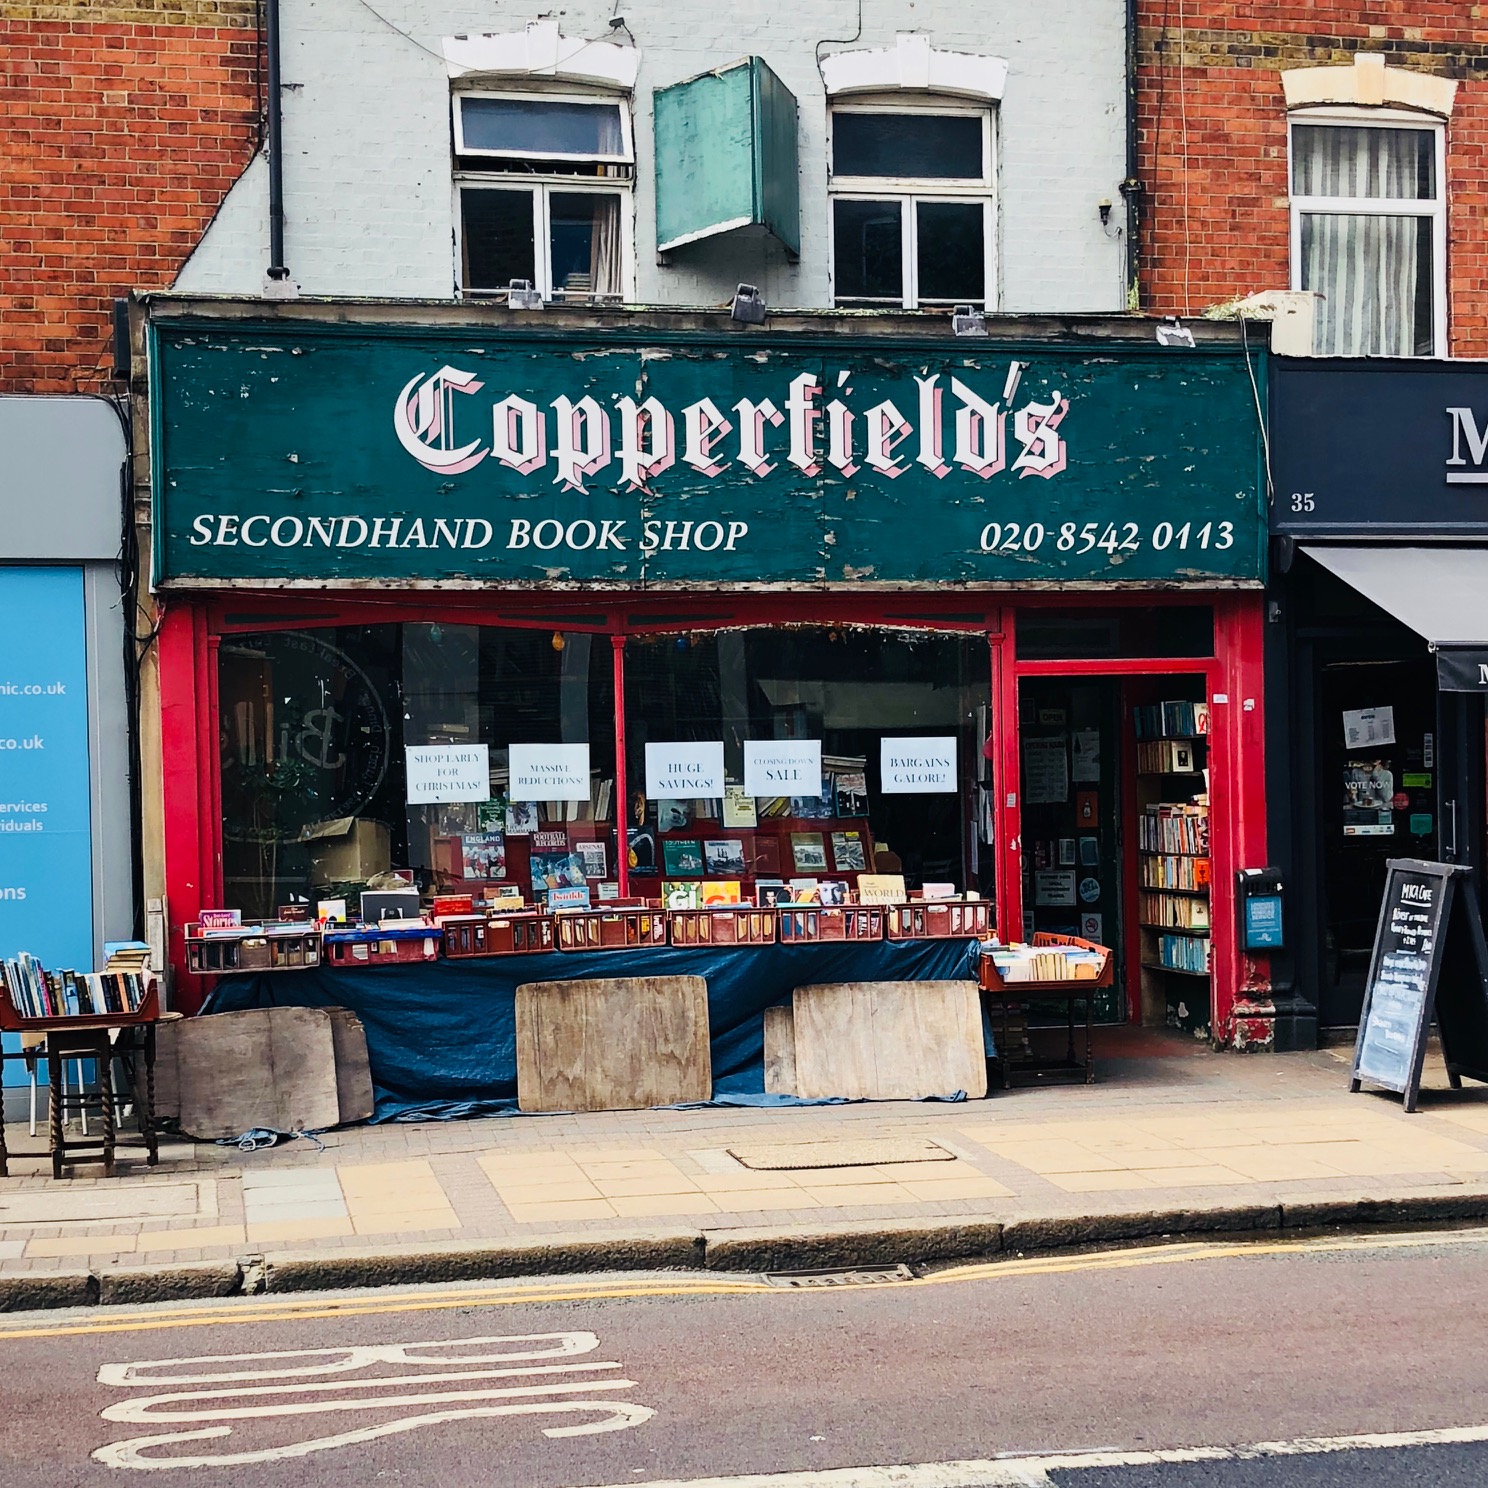 Copperfield's Secondhand Book Shop